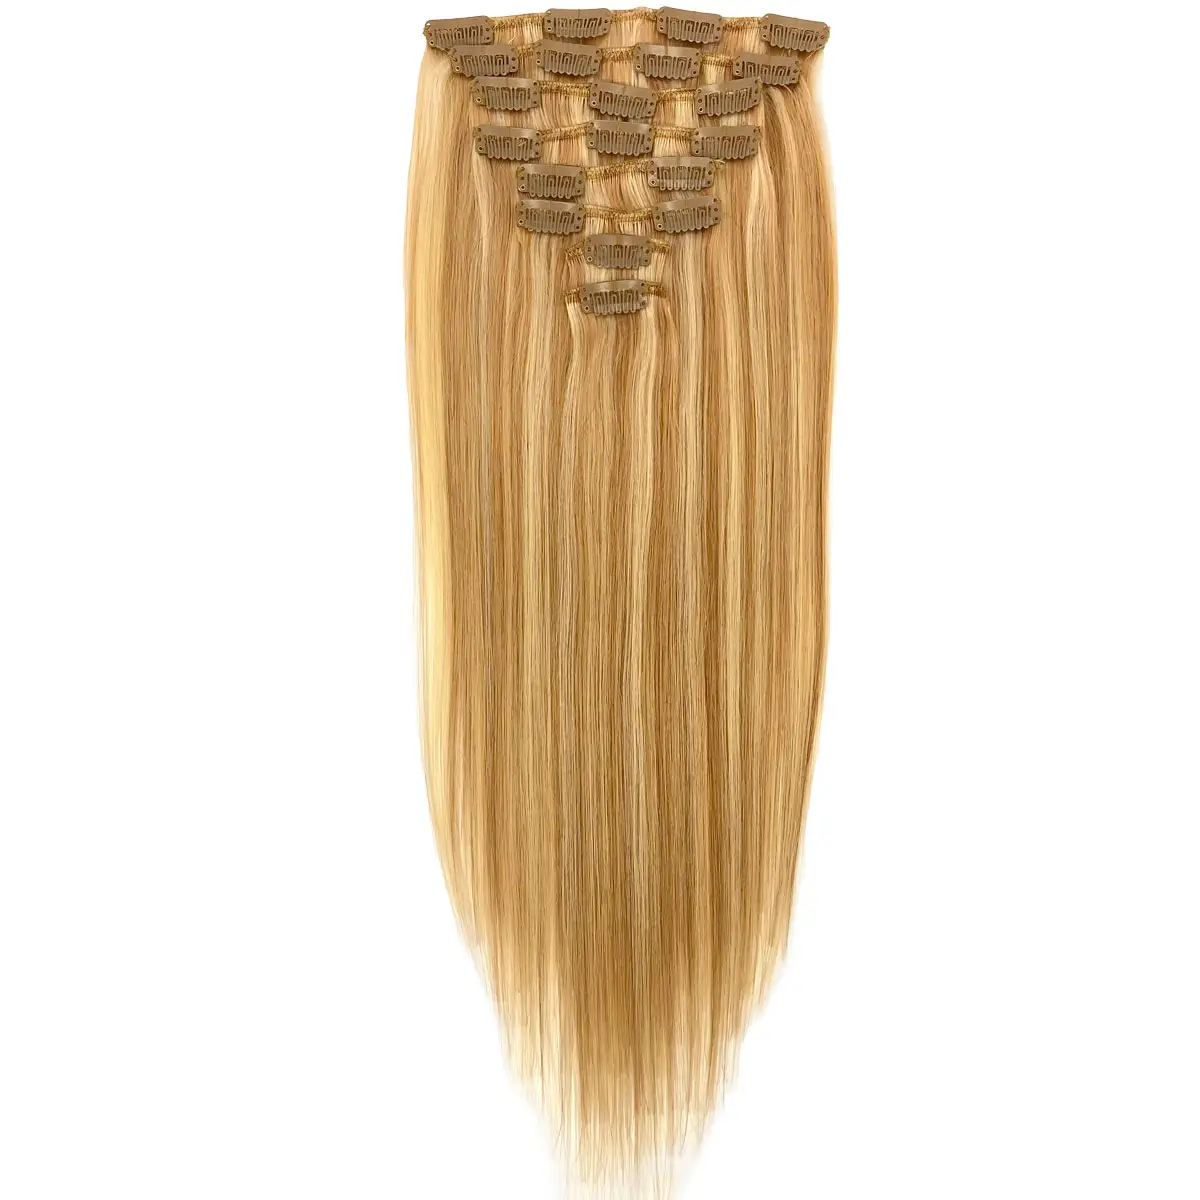 Double Drawn Double Hair Sets Clip On Remy Wholesale Price 100g 120g 160g 100g180g 210g 260g 280g Human Hair Clip In Extensions